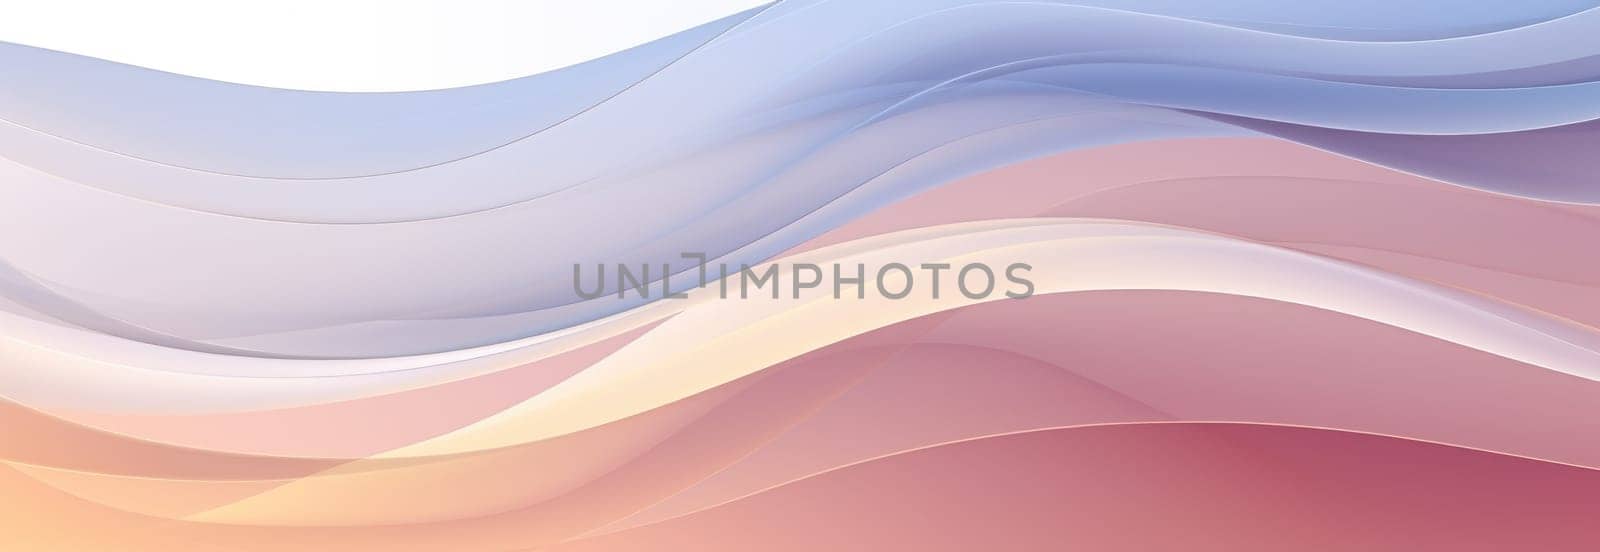 Abstract background with wavy lines and shapes in pastel colours by palinchak